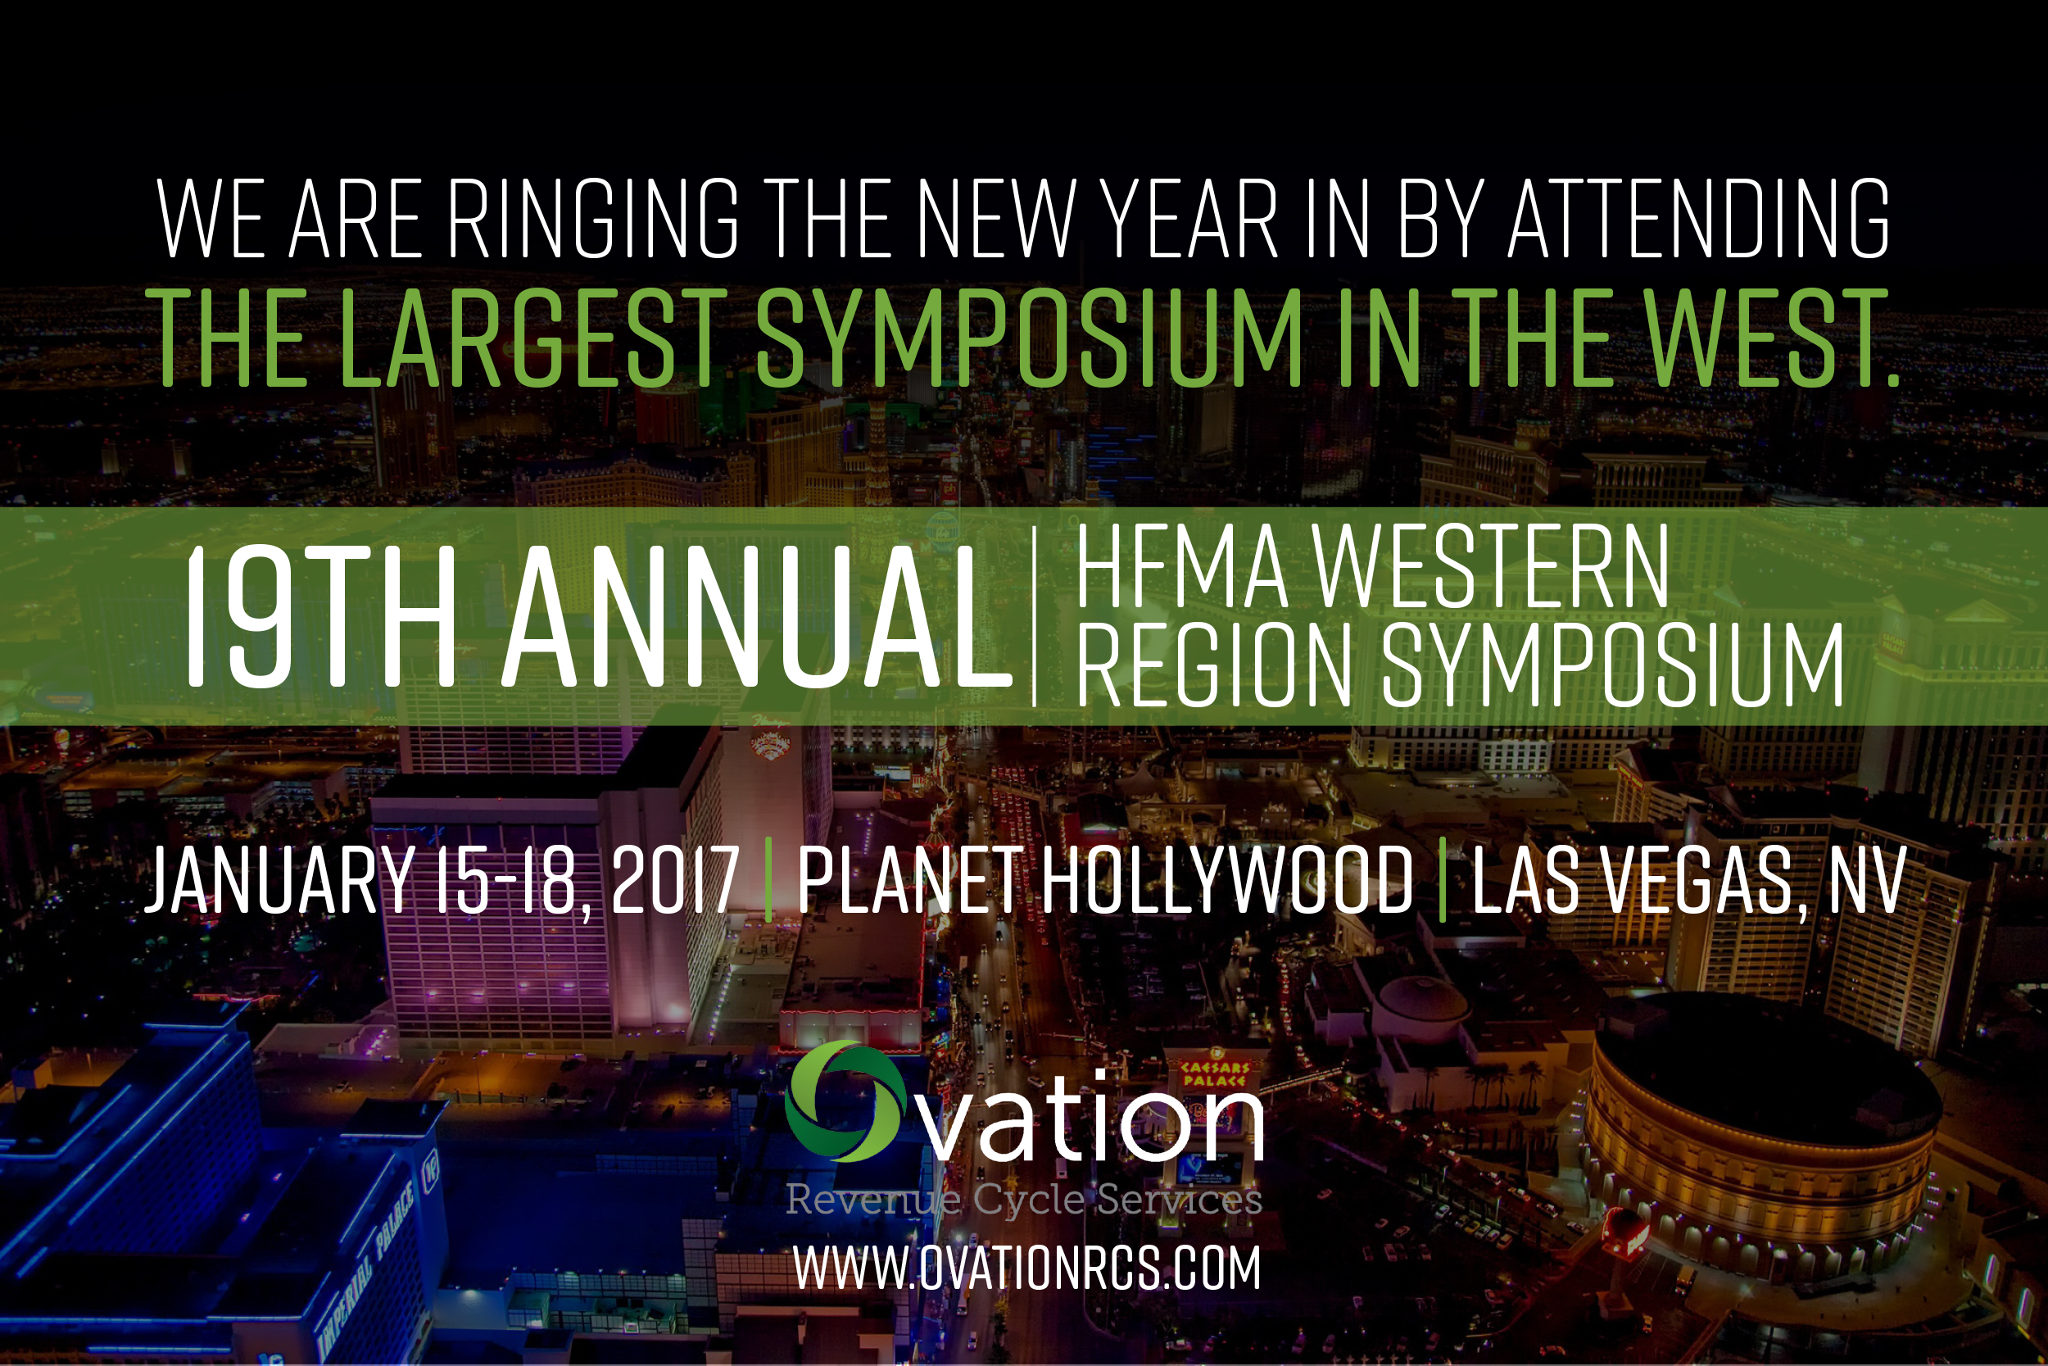 Ovation will be attending the HFMA Western Region Symposium from